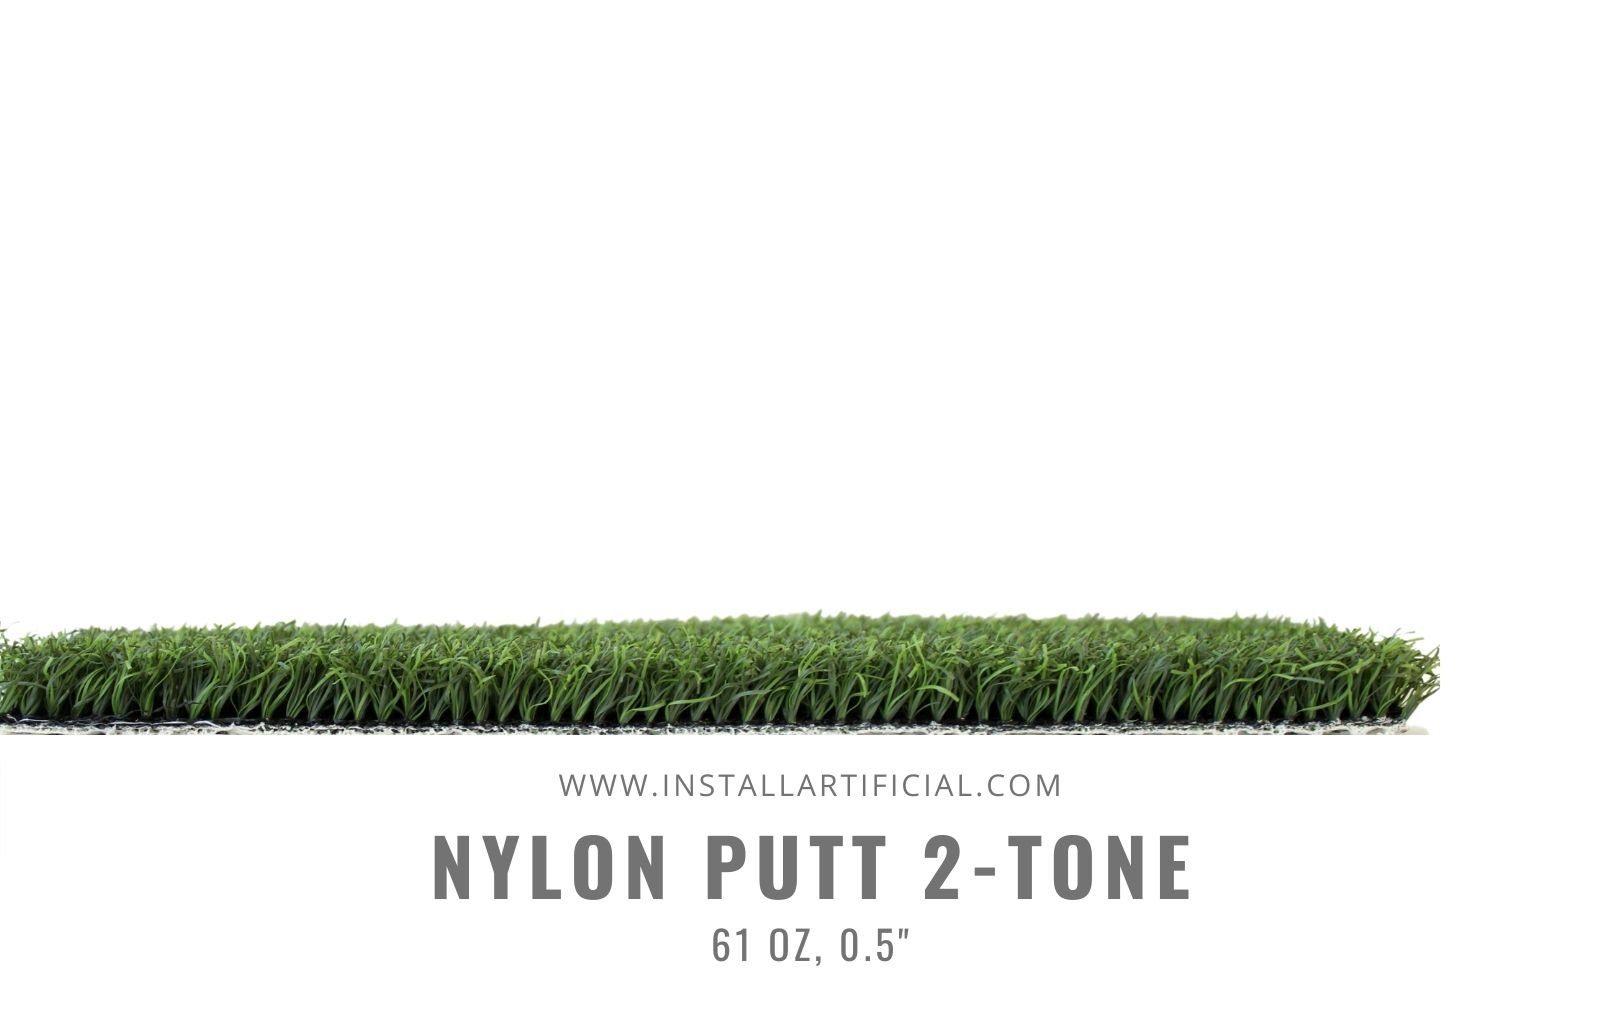 Nylon Putt 2-Tone, Synthetic Grass Warehouse, Tiger Turf, Side